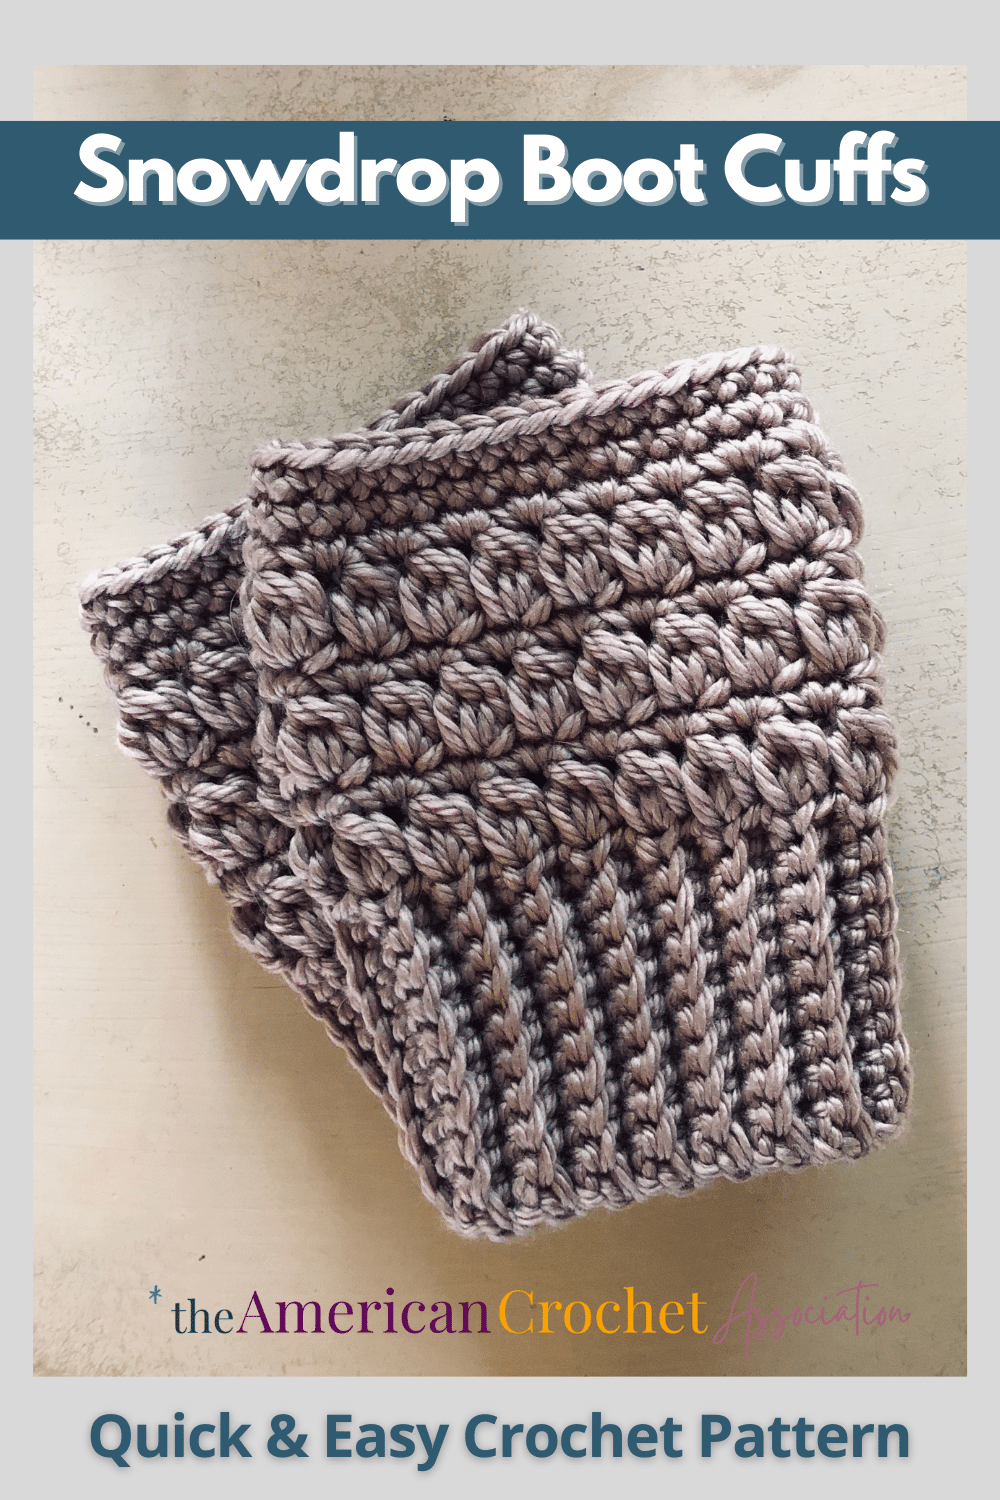 Taupe boot cuffs laying flat on floor